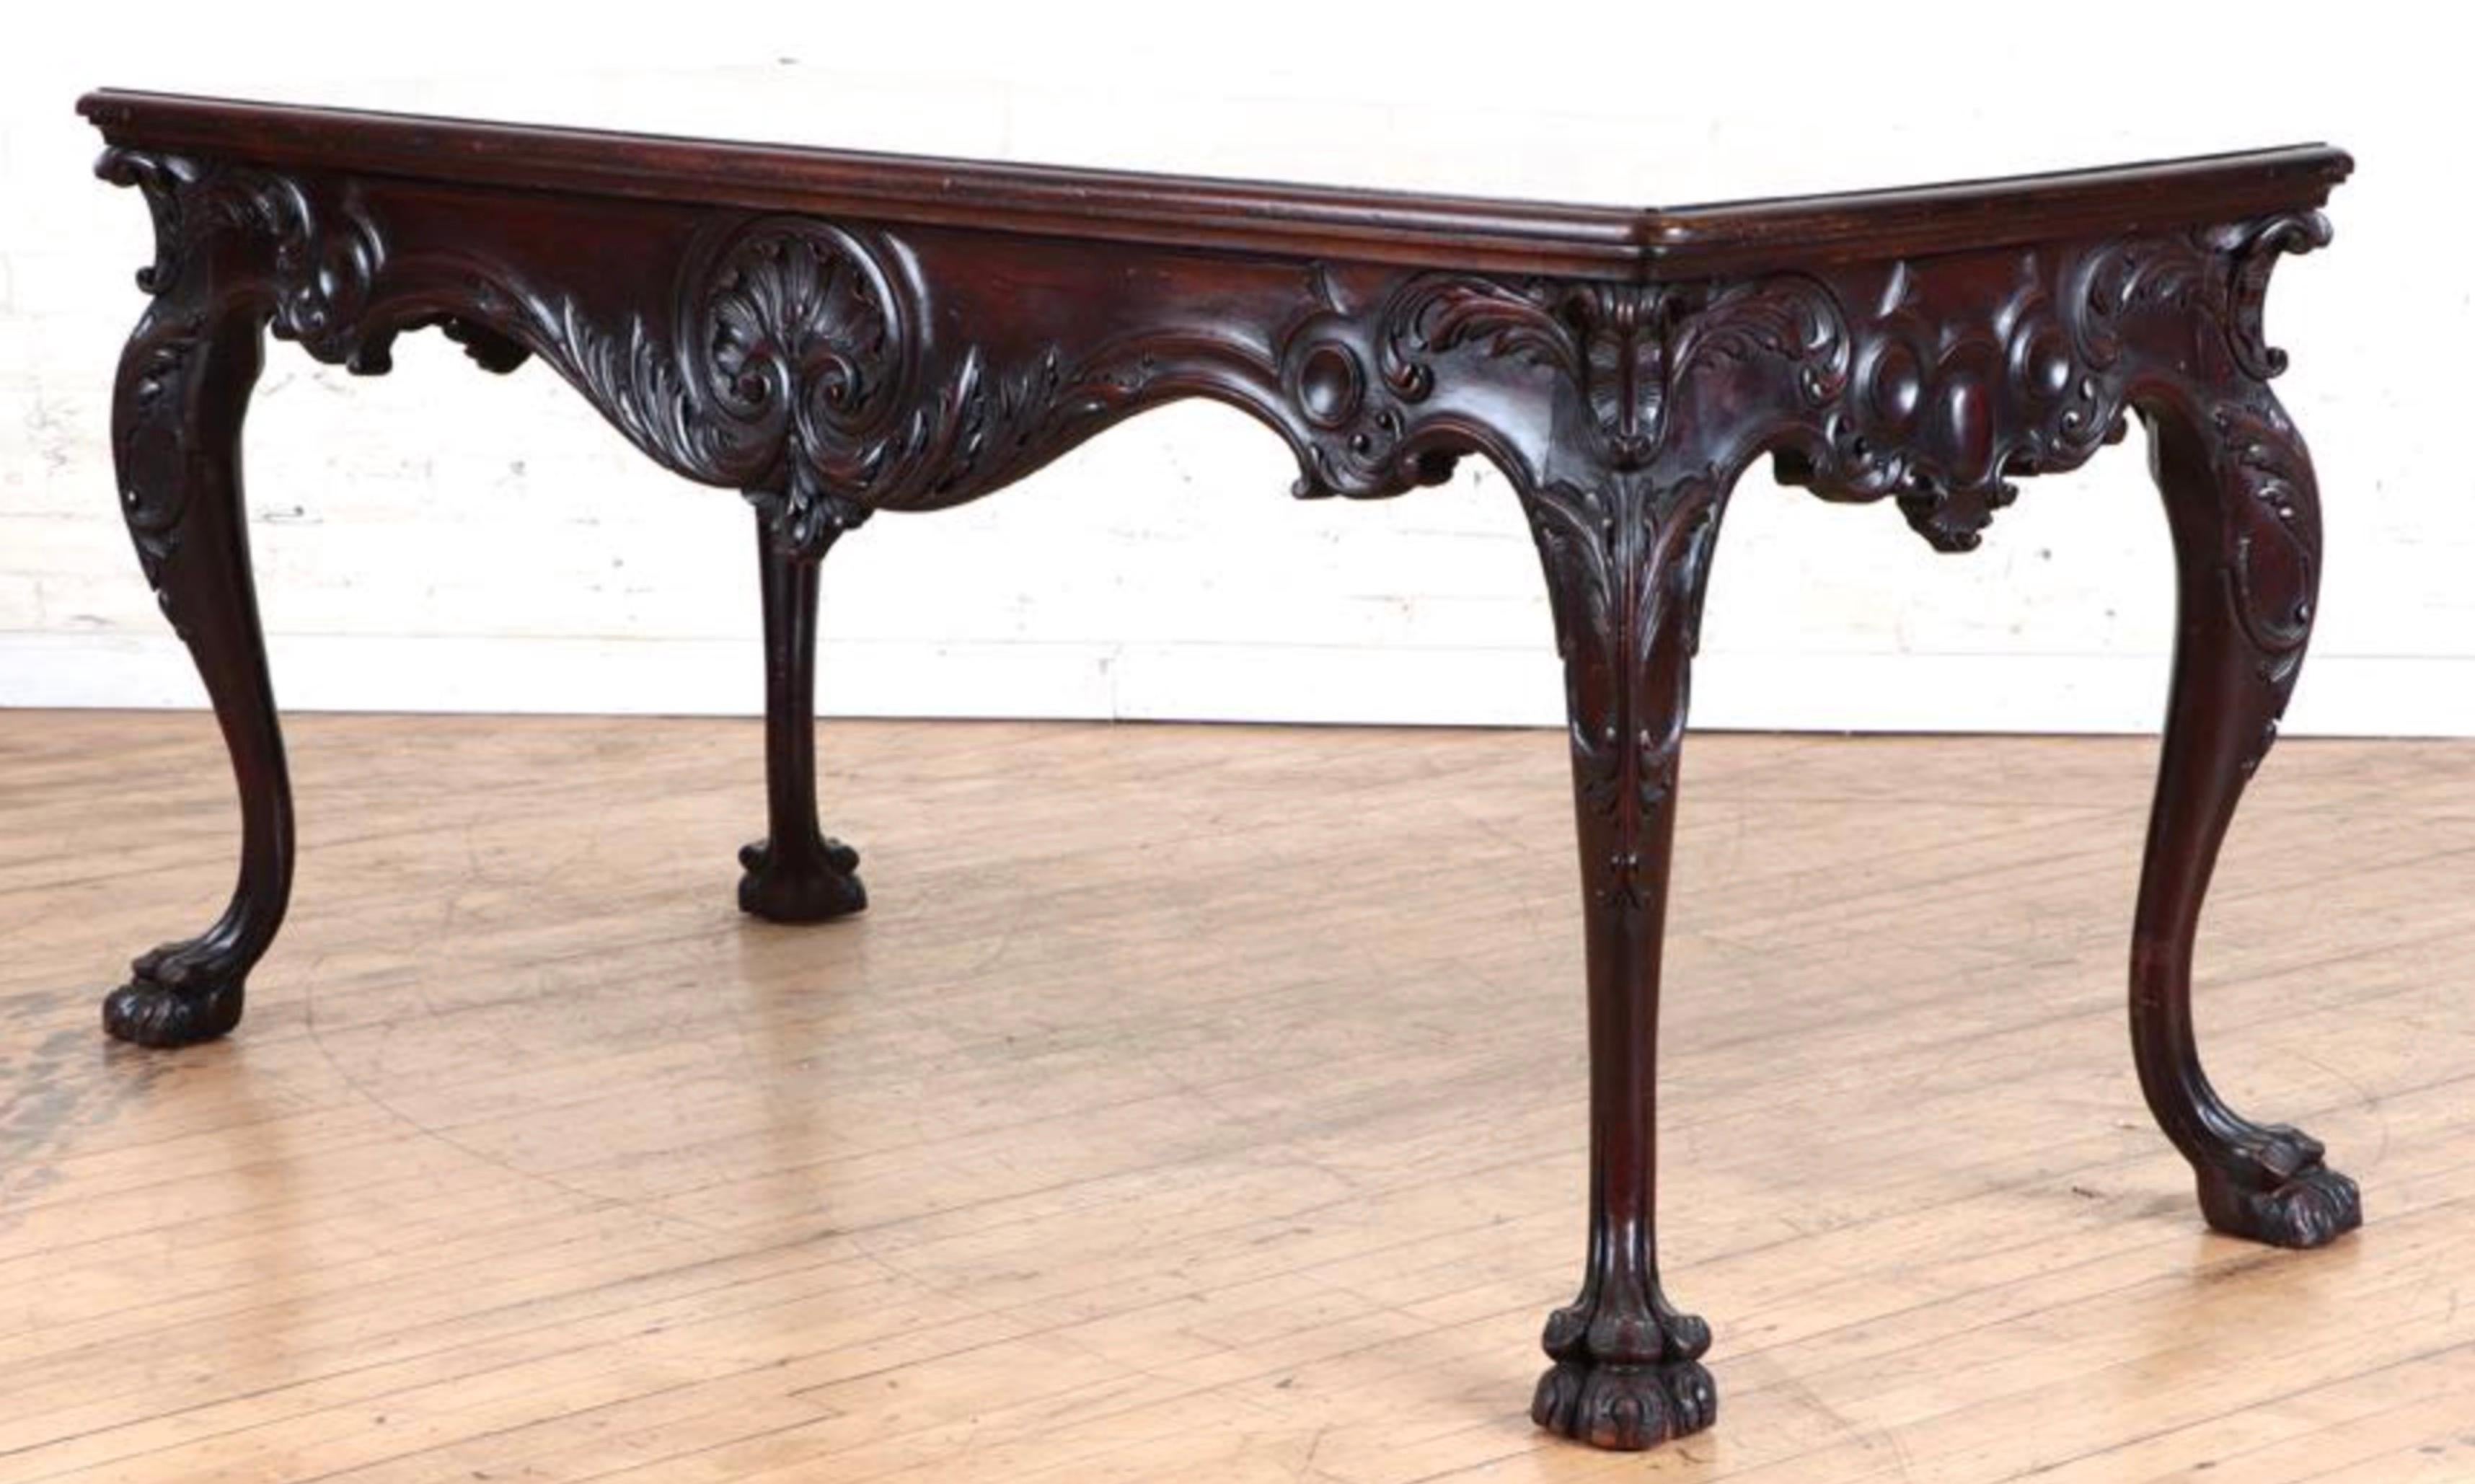 A Georgian style hand carved mahogany writing table circa 1895. Beautiful clawed feet, solid mahogany top and detailed apron with decorative motif.